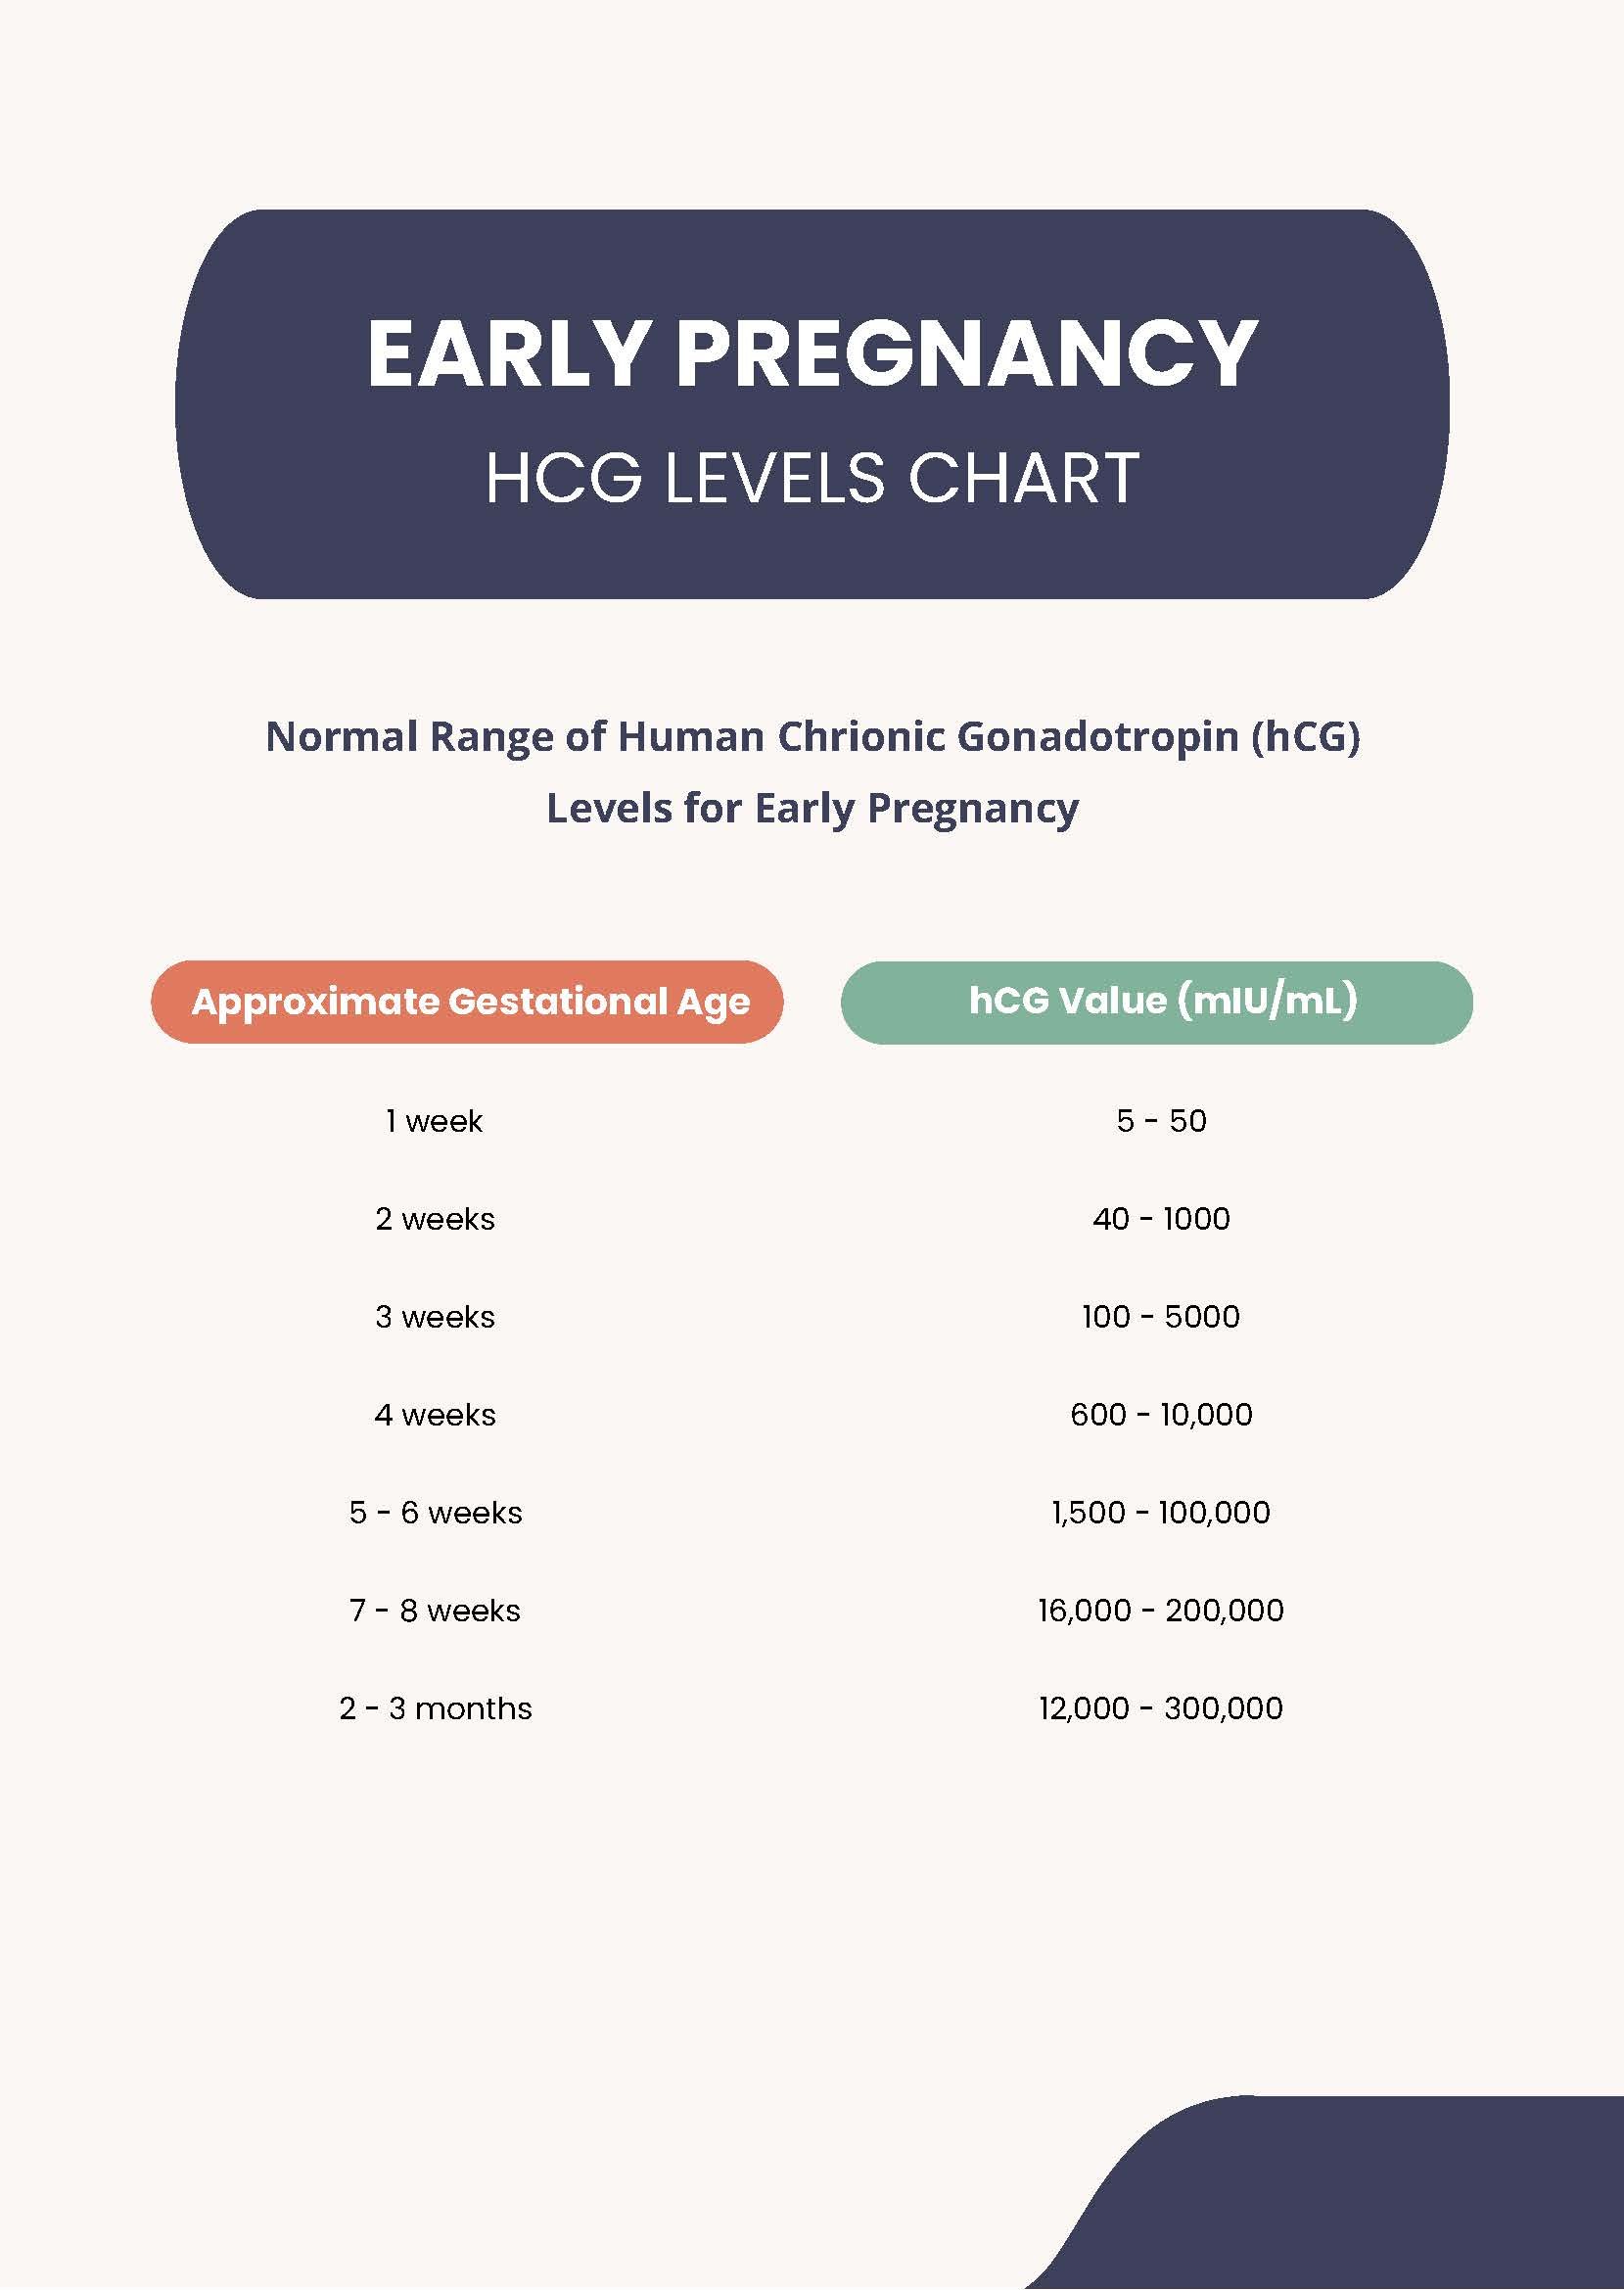 Early Pregnancy HCG Levels Chart in PDF